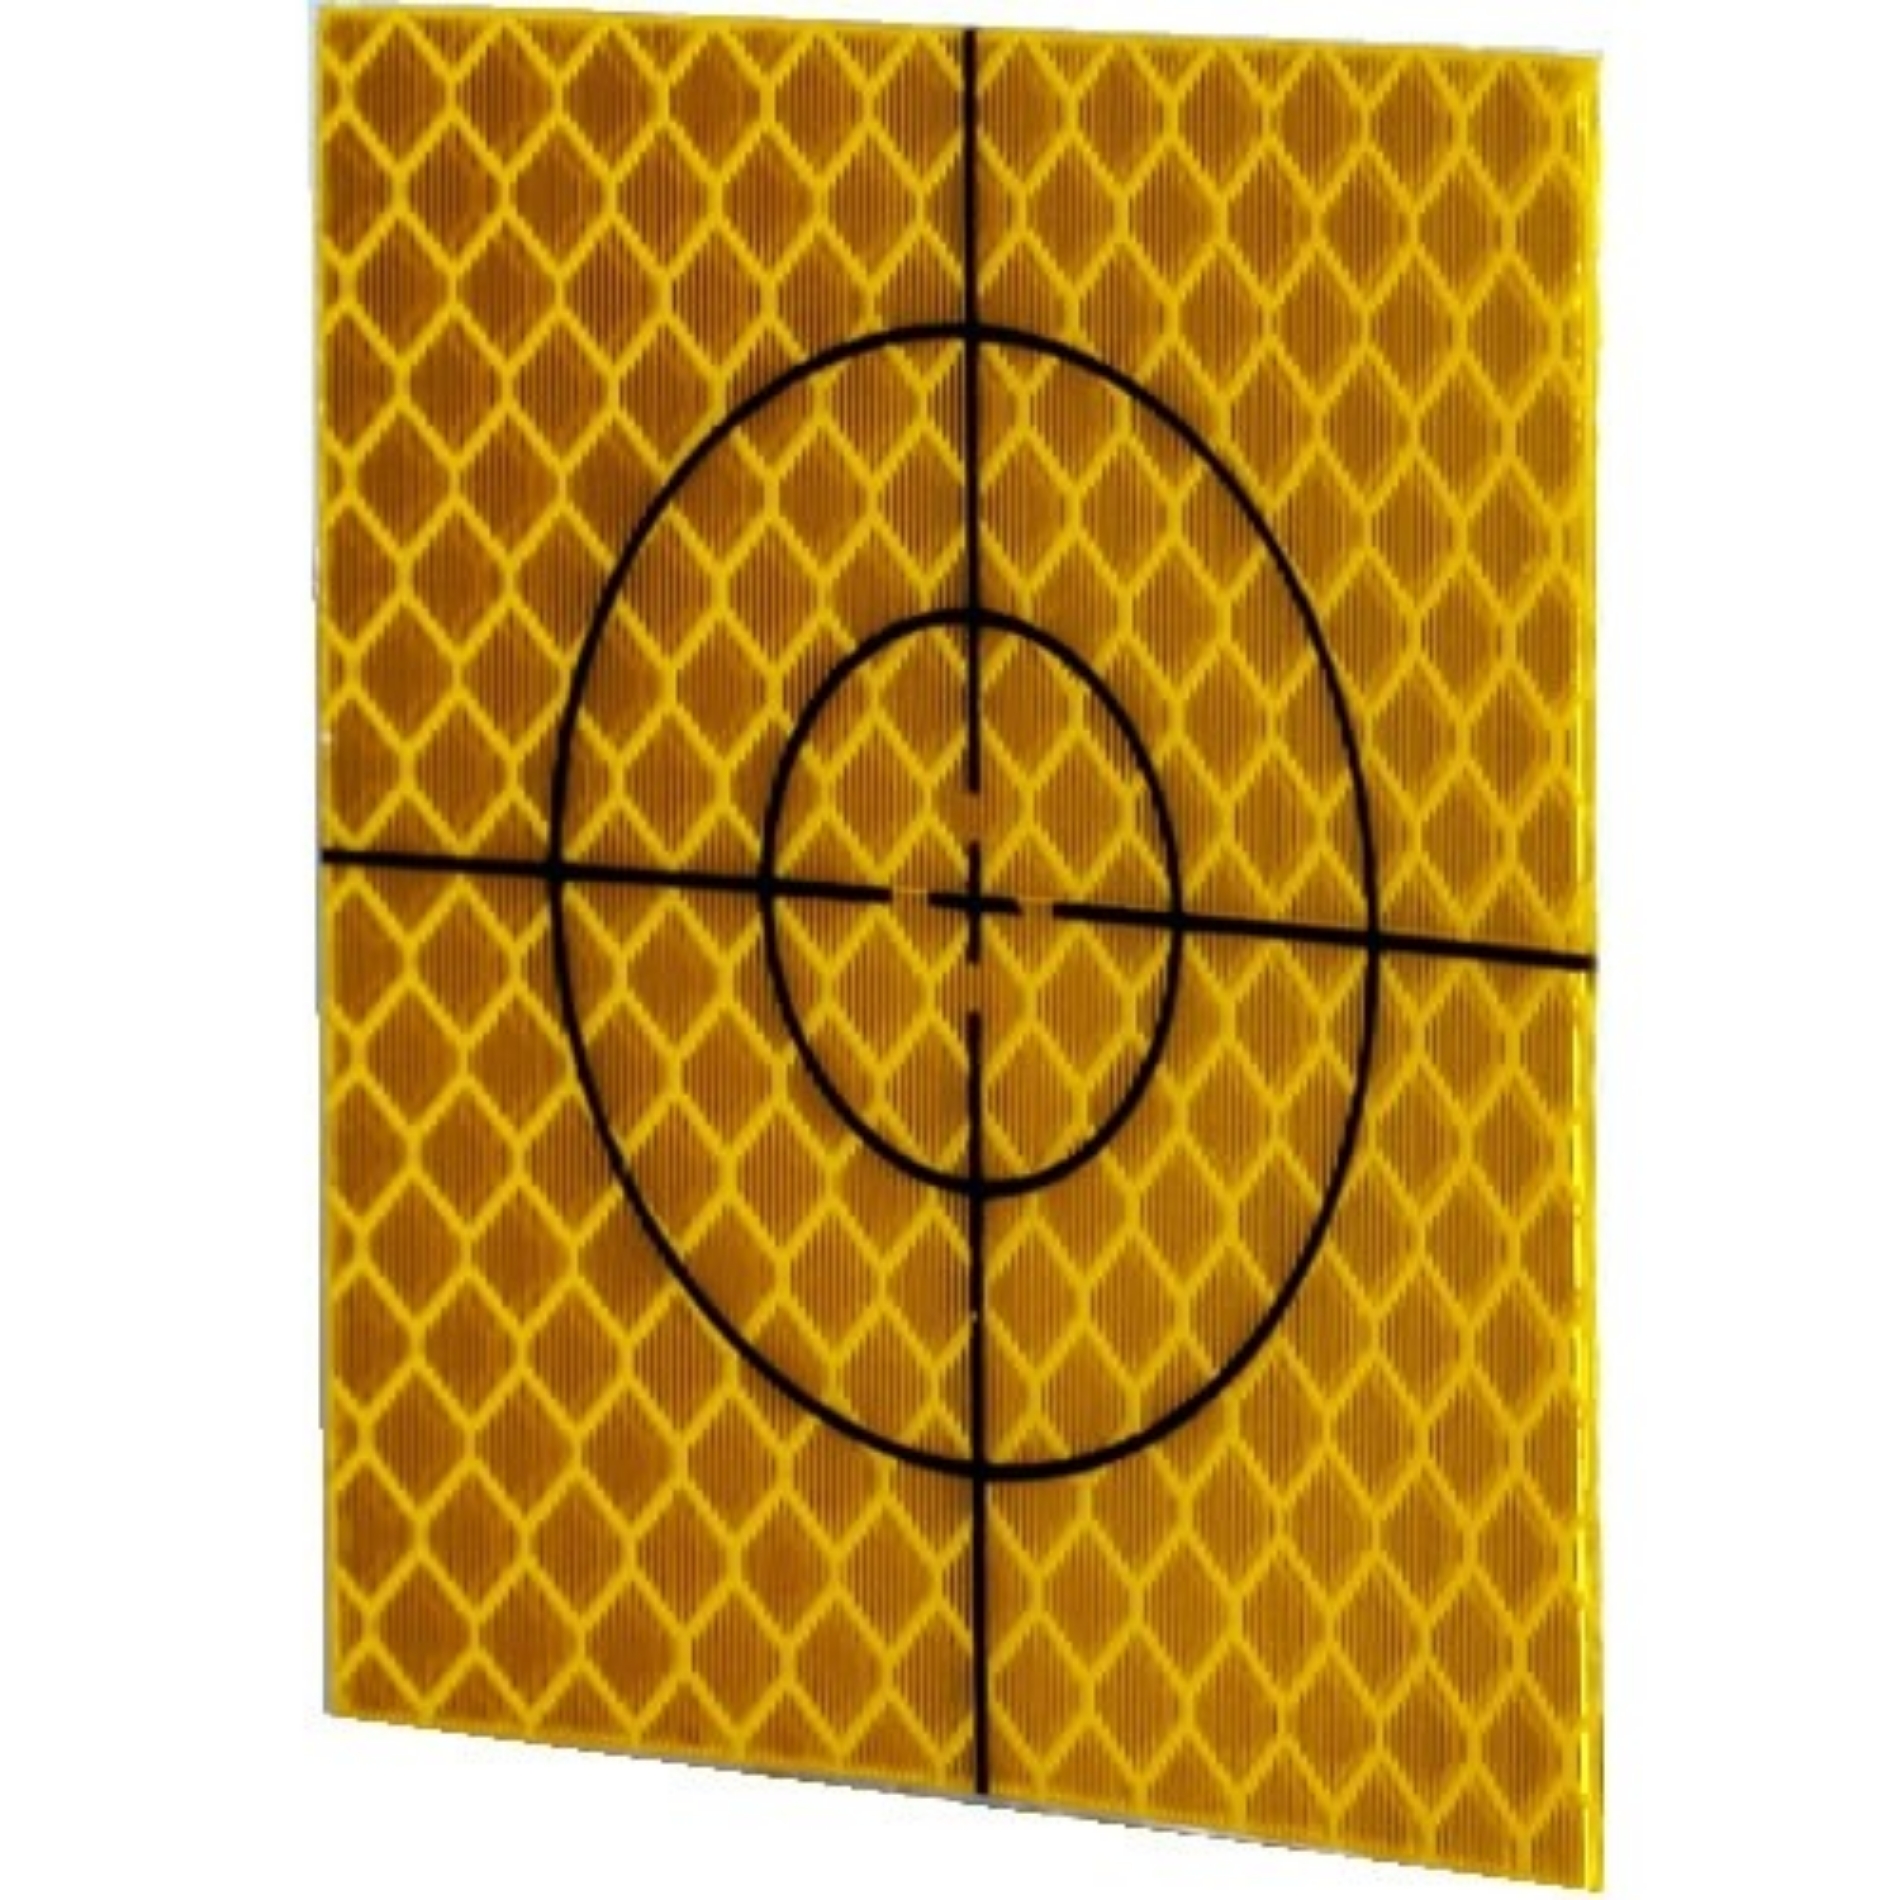 case free!!! 100 No - 40mm x 40mm Silver Reflective Targets/Labels 